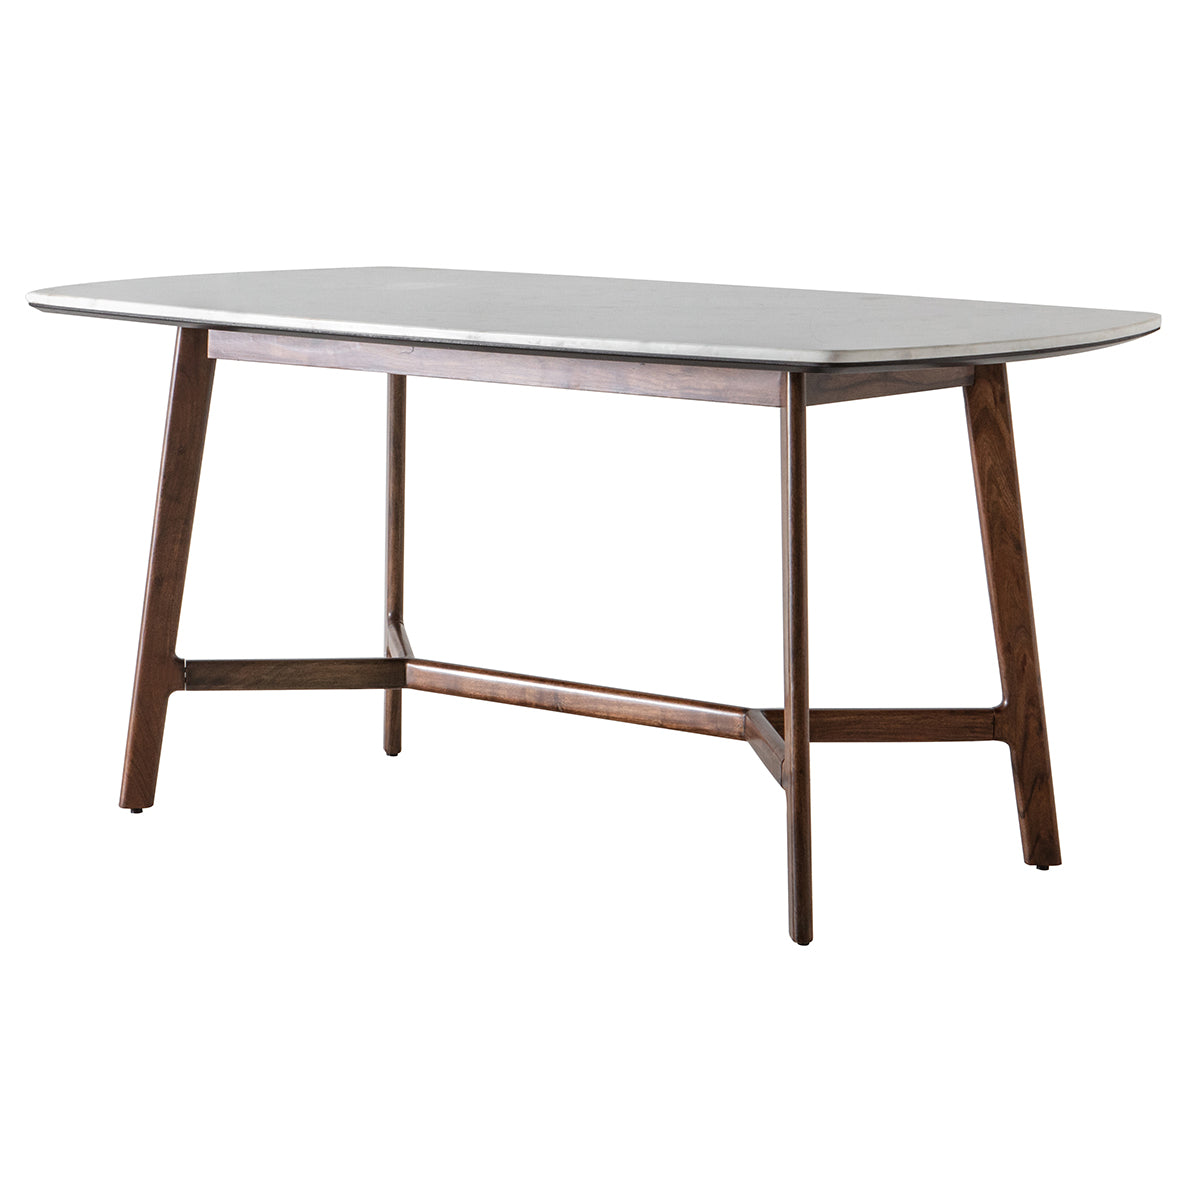 An Avonwick Dining Table with a marble top, perfect for home furniture and interior decor.